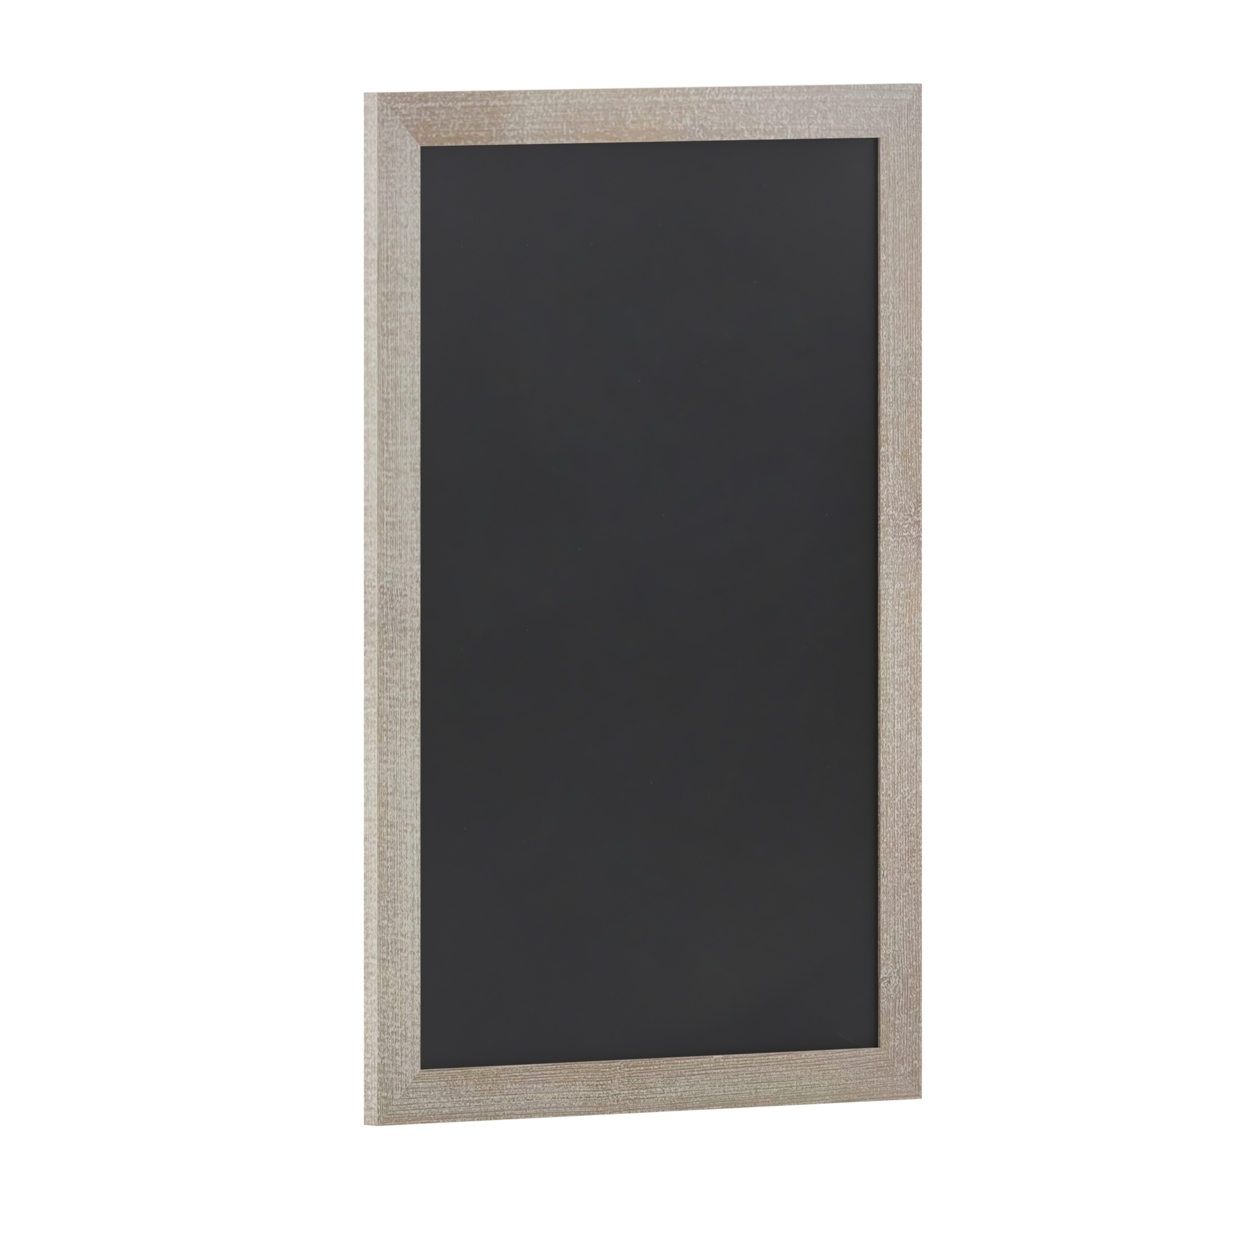 Wall Hanging Chalkboard, Weathered Wood Frame, Rough Hewn Texture